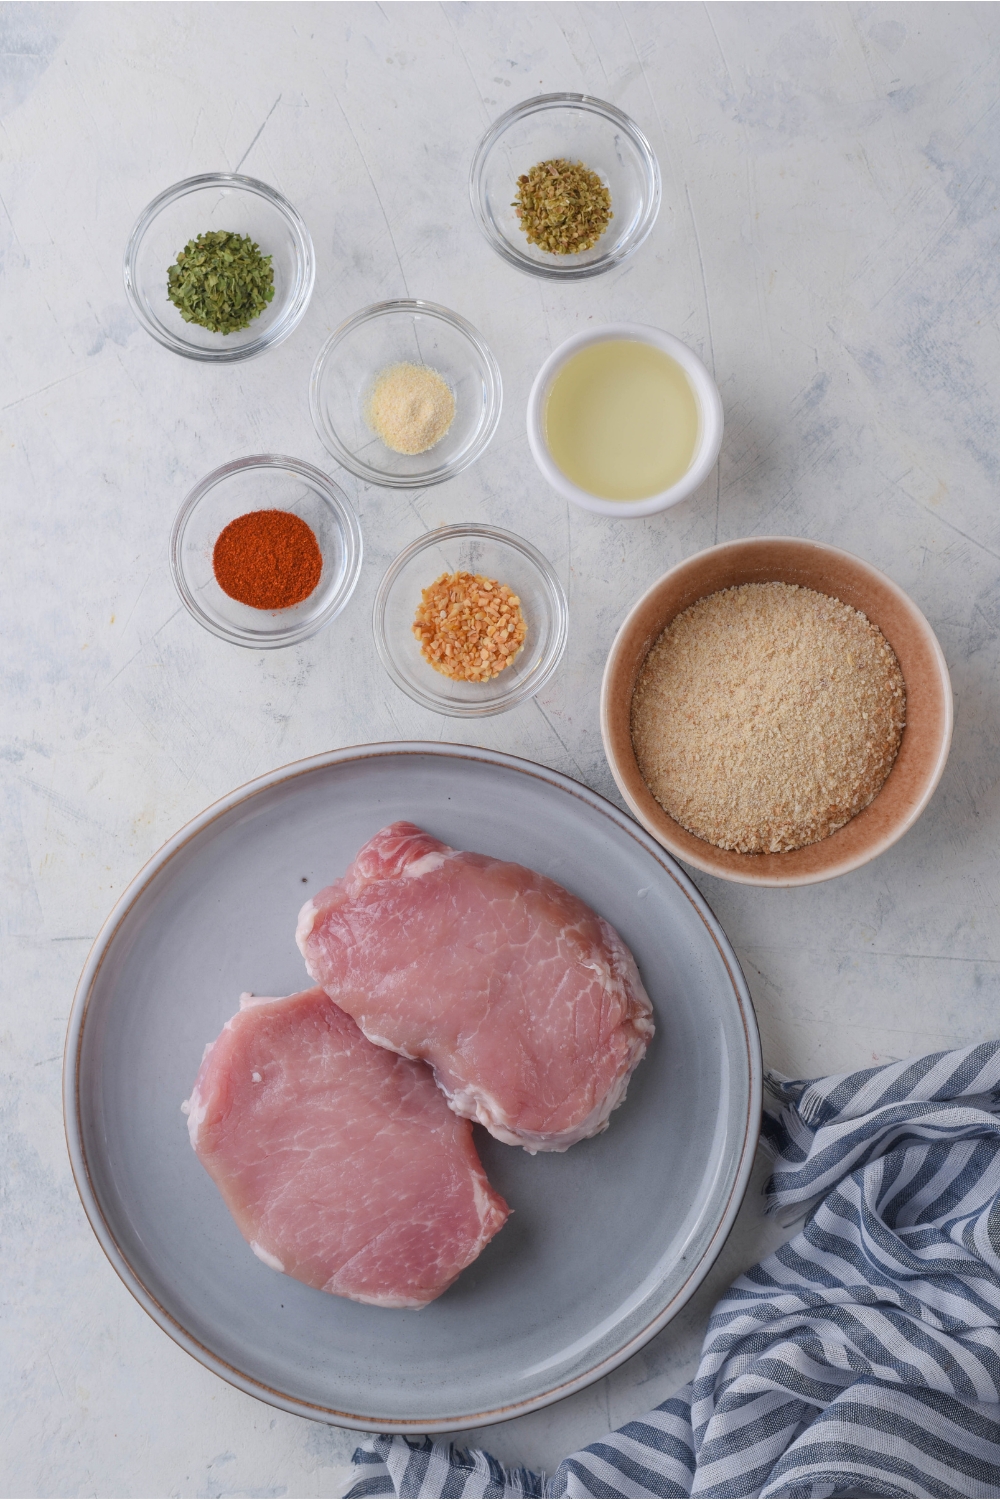 An assortment of ingredients including a plate of pork chops, bread crumbs, and spices.